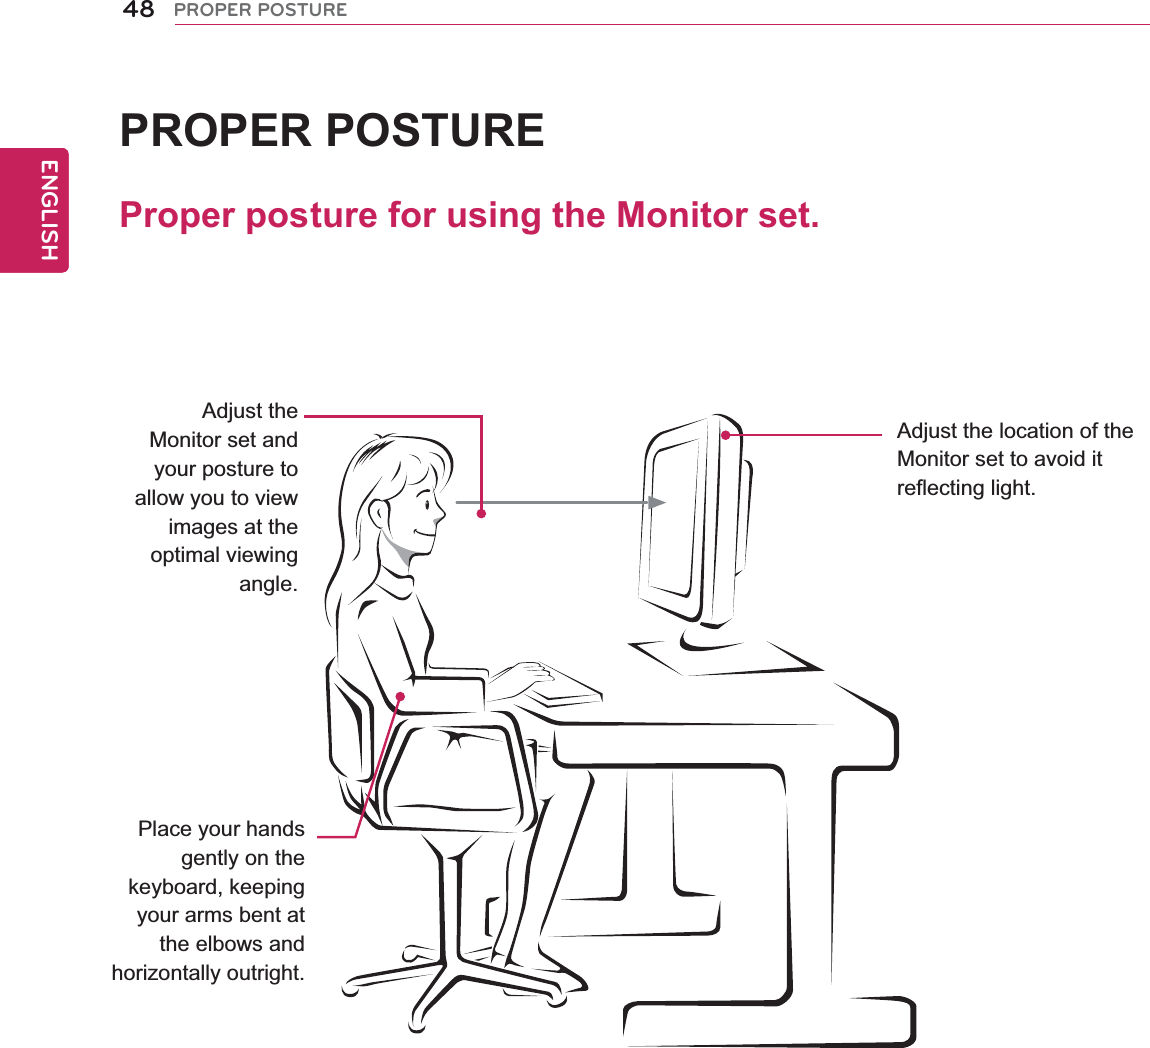 48ENGENGLISHPROPER POSTUREProper posture for using the Monitor set.PROPER POSTUREAdjust the Monitor set and your posture to allow you to view images at the optimal viewing angle.Place your hands gently on the keyboard, keeping your arms bent at the elbows and horizontally outright.Adjust the location of the Monitor set to avoid it reflecting light.